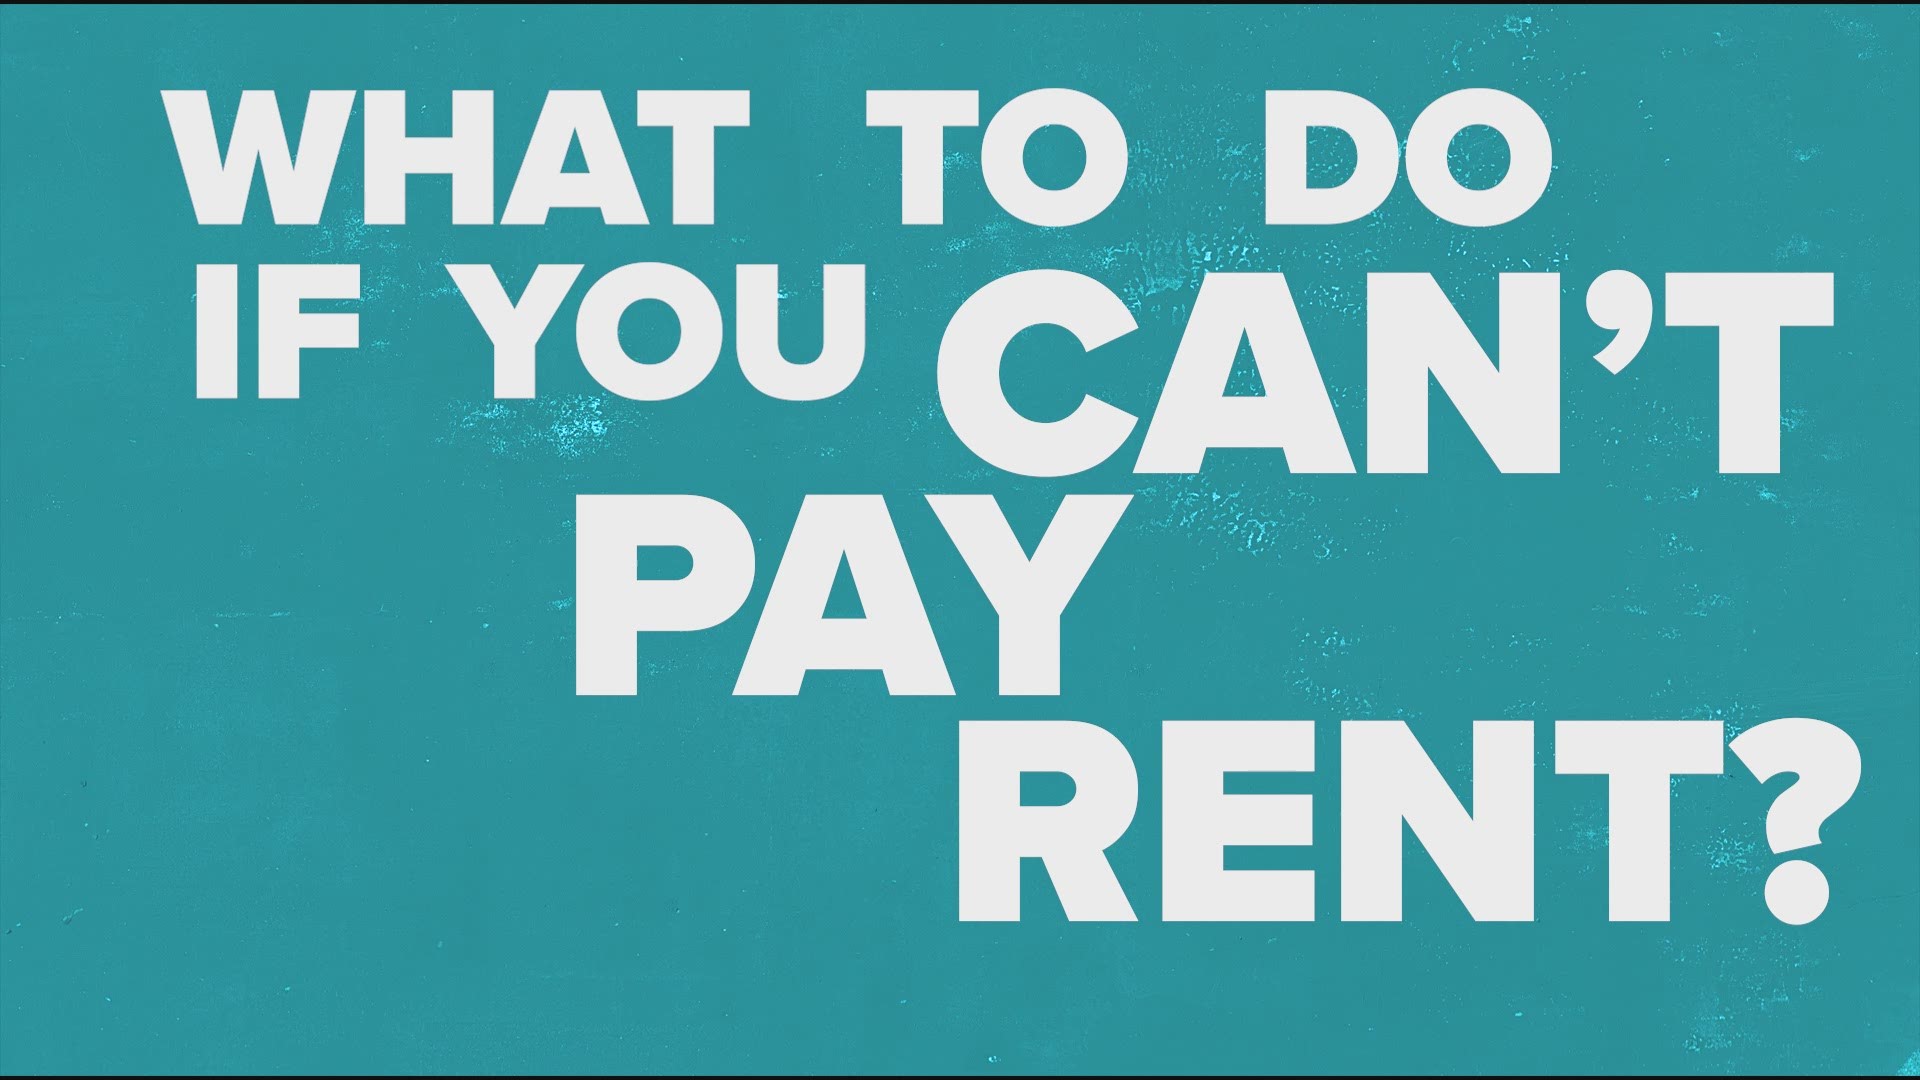 Here are some options if you are unable to pay rent